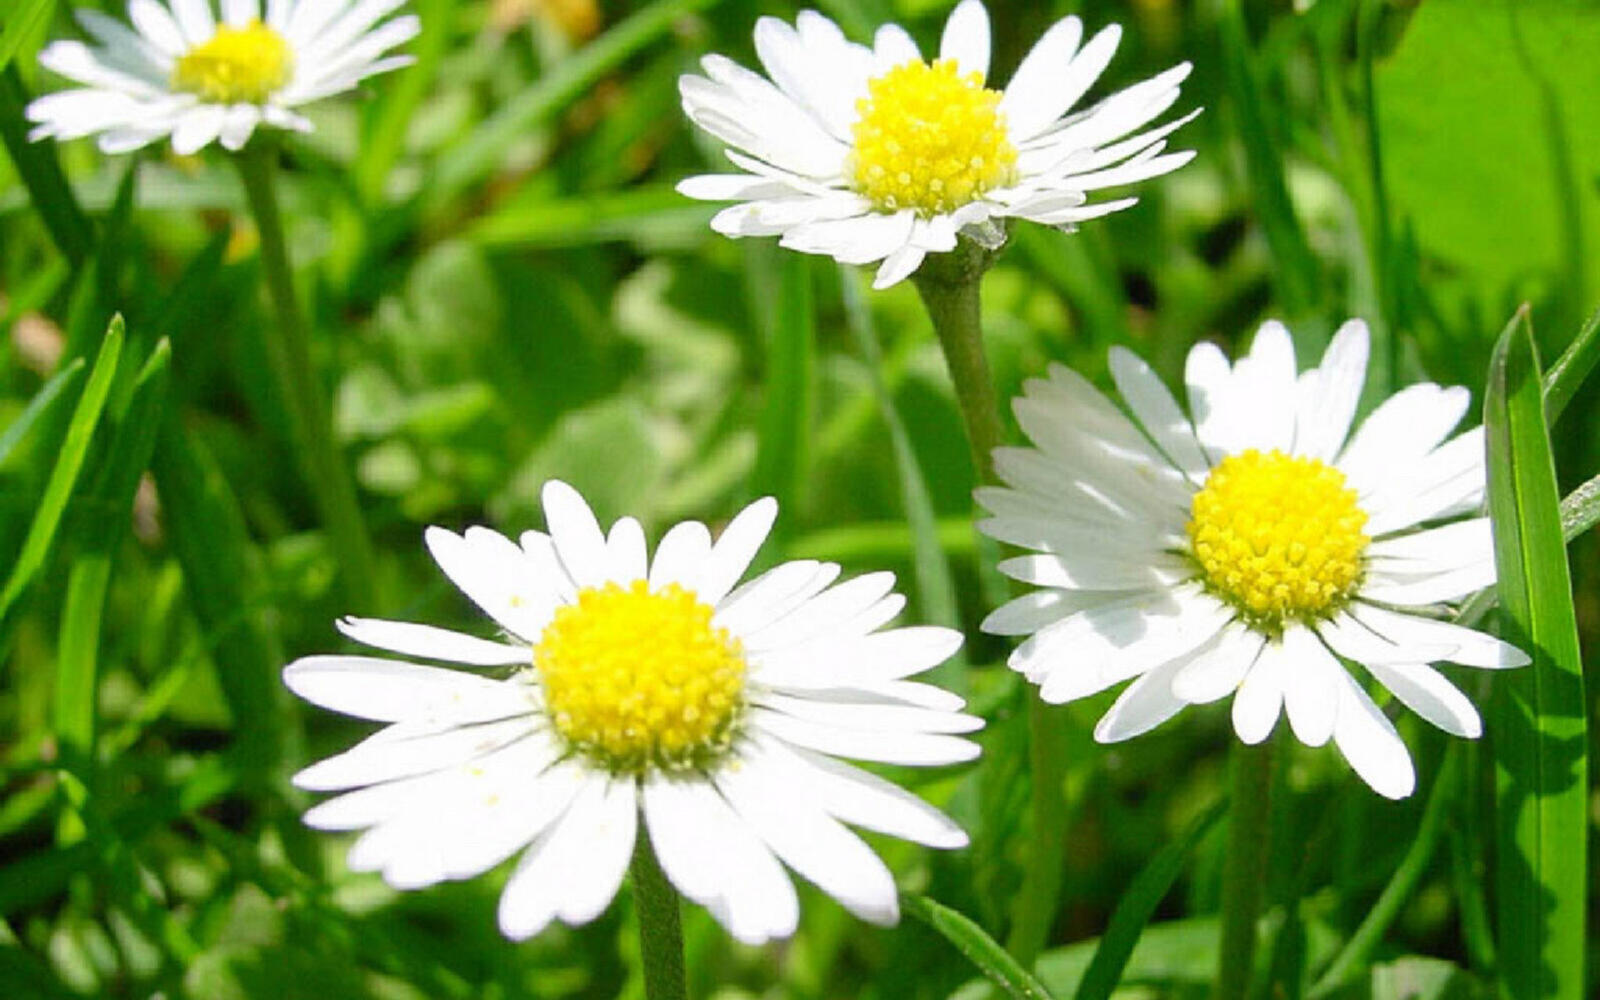 Wallpapers stems daisies grass on the desktop